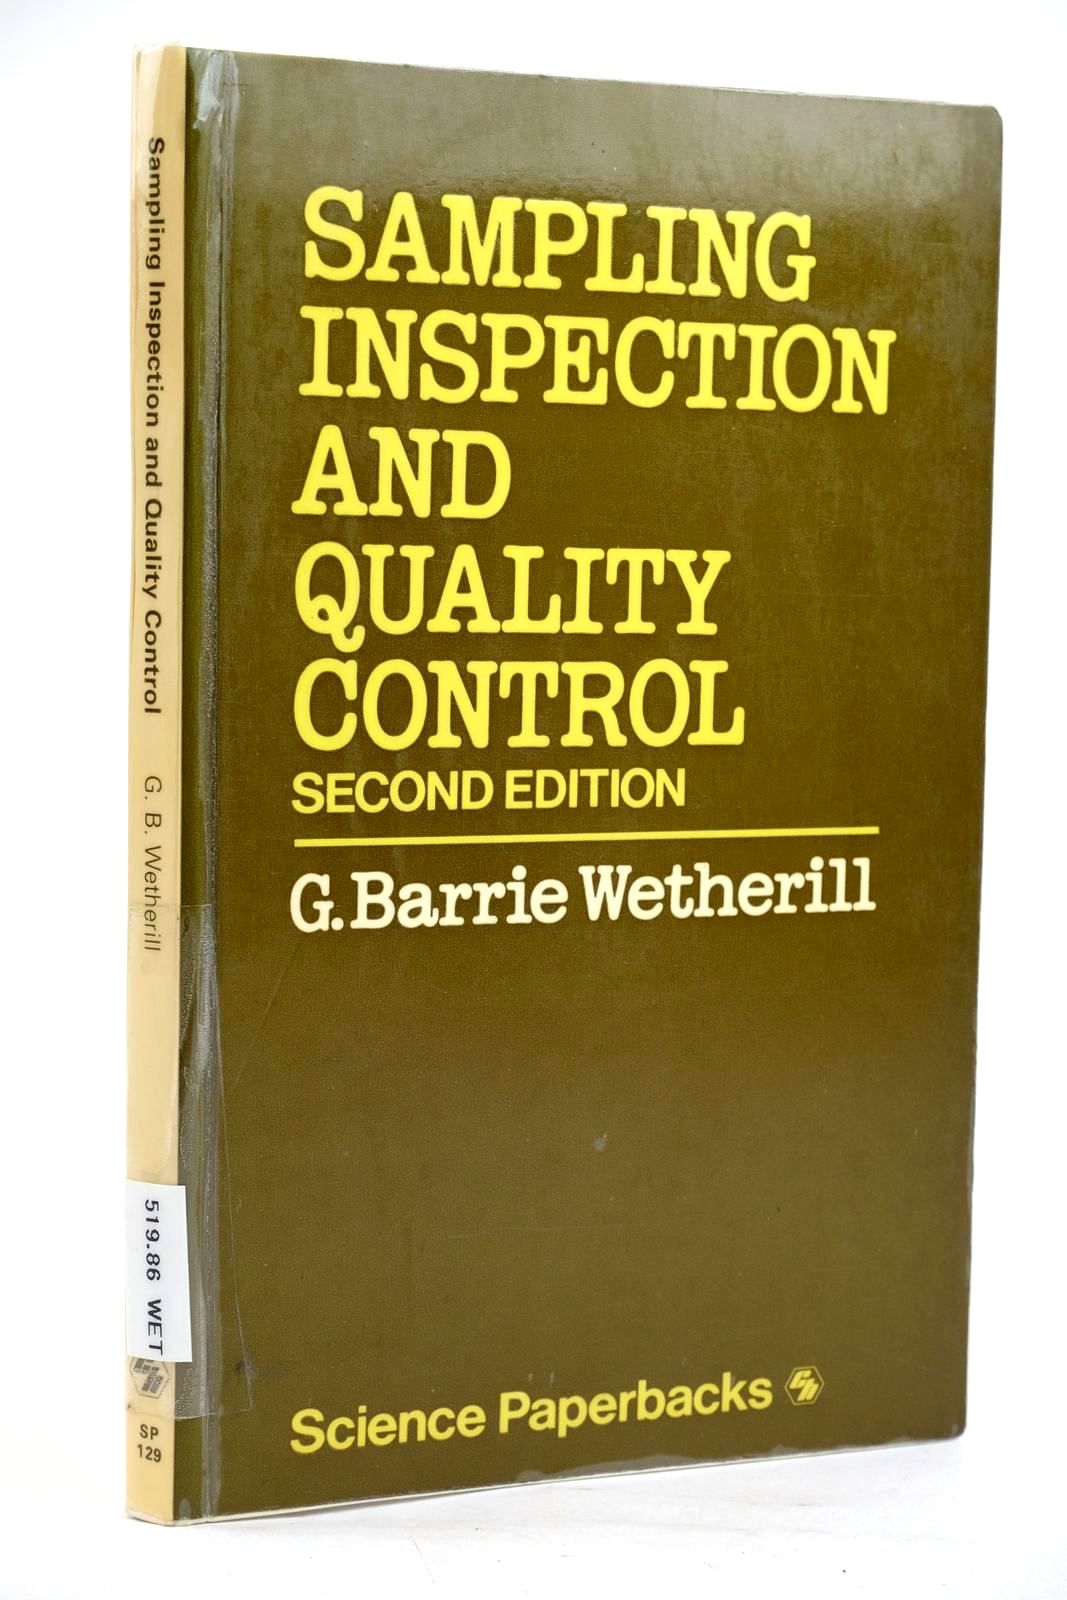 Photo of SAMPLING INSPECTION AND QUALITY CONTROL written by Wetherill, G. Barrie published by Chapman & Hall Ltd (STOCK CODE: 1319605)  for sale by Stella & Rose's Books